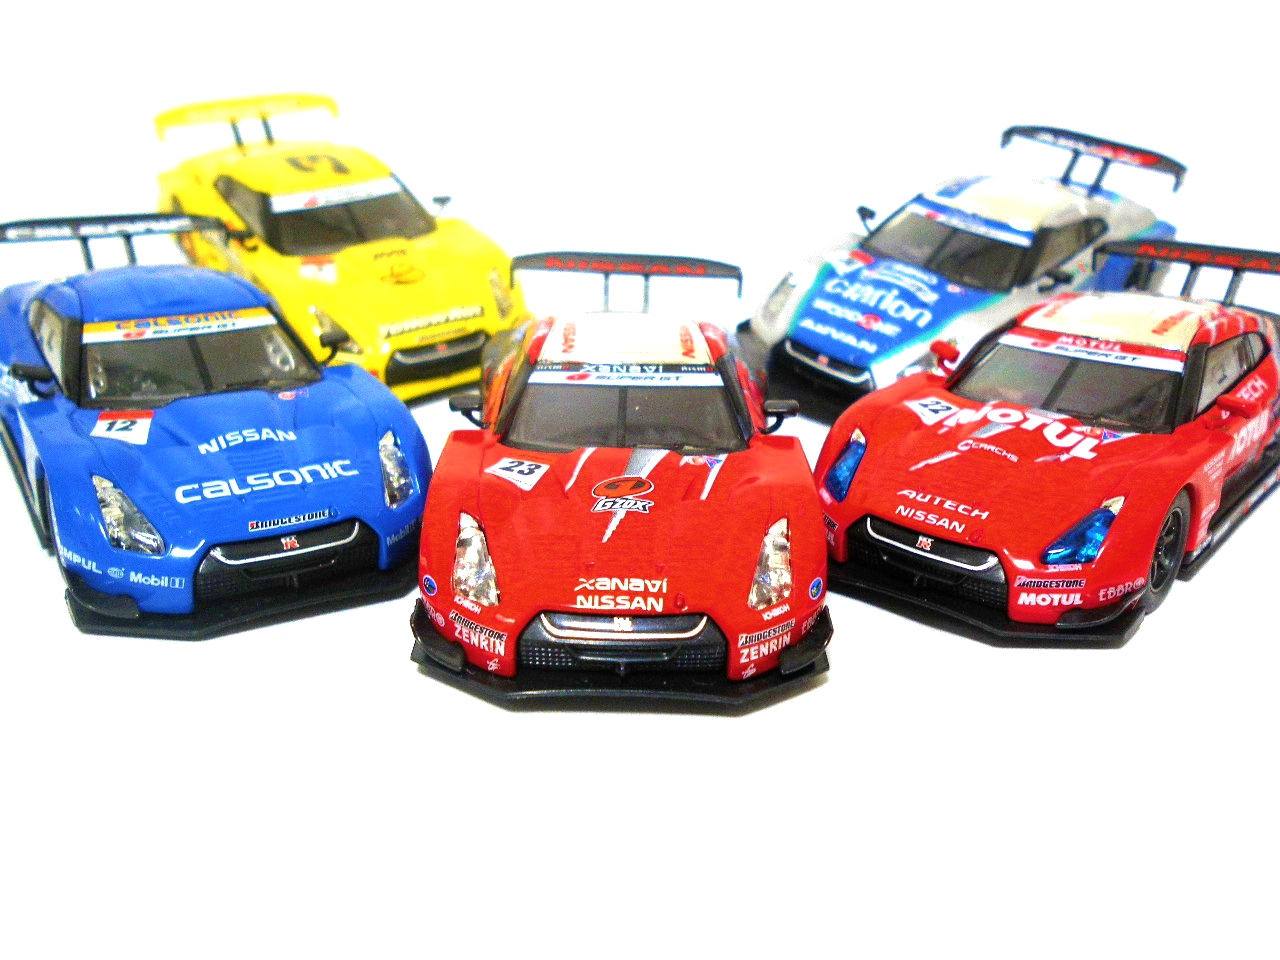 KYOSHO 1/64 XANAVI NISMO GT-R 2008 SUPER GT | アペックスの趣味ノート